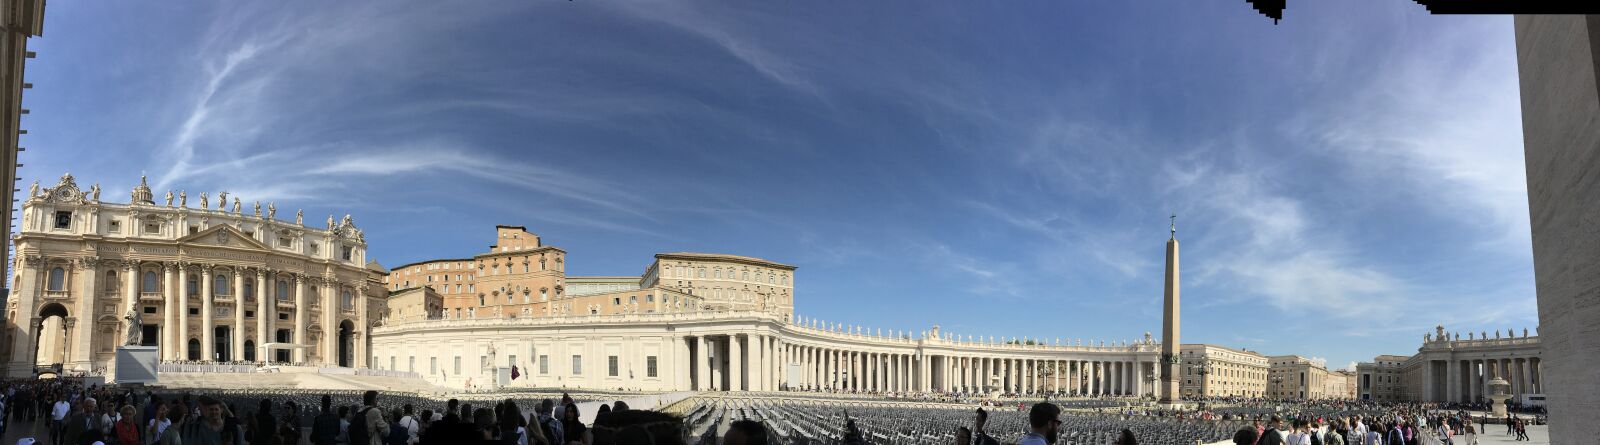 iPad Pro back camera 4.15mm f/2.2 sample photo. St, peters square, vatican photography